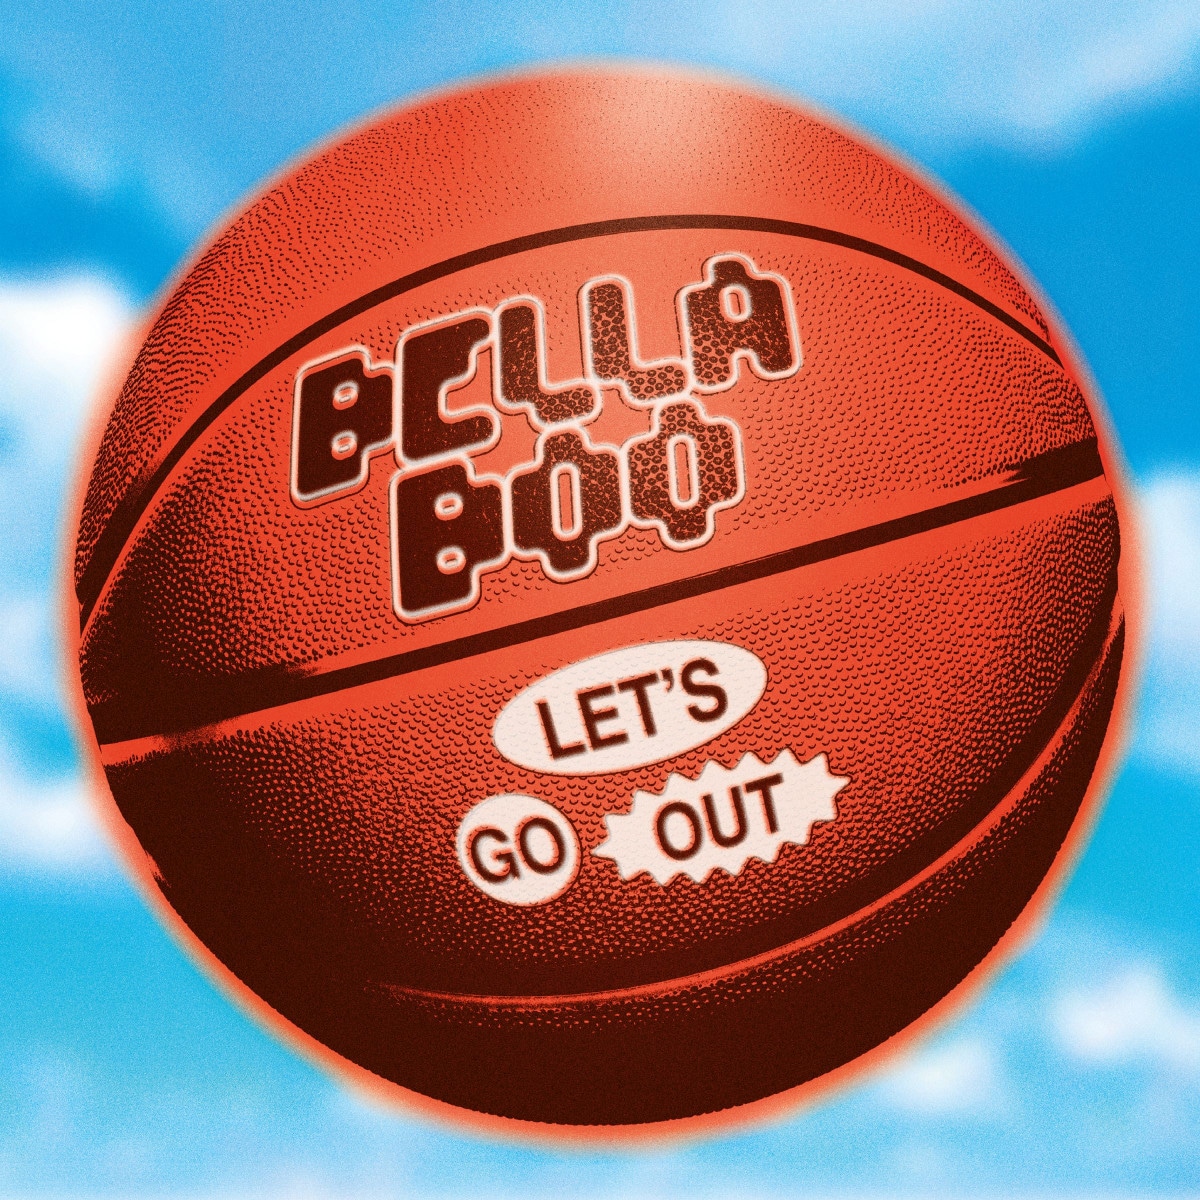 Bella Boo - Let's Go Out - RB096 - RUNNING BACK